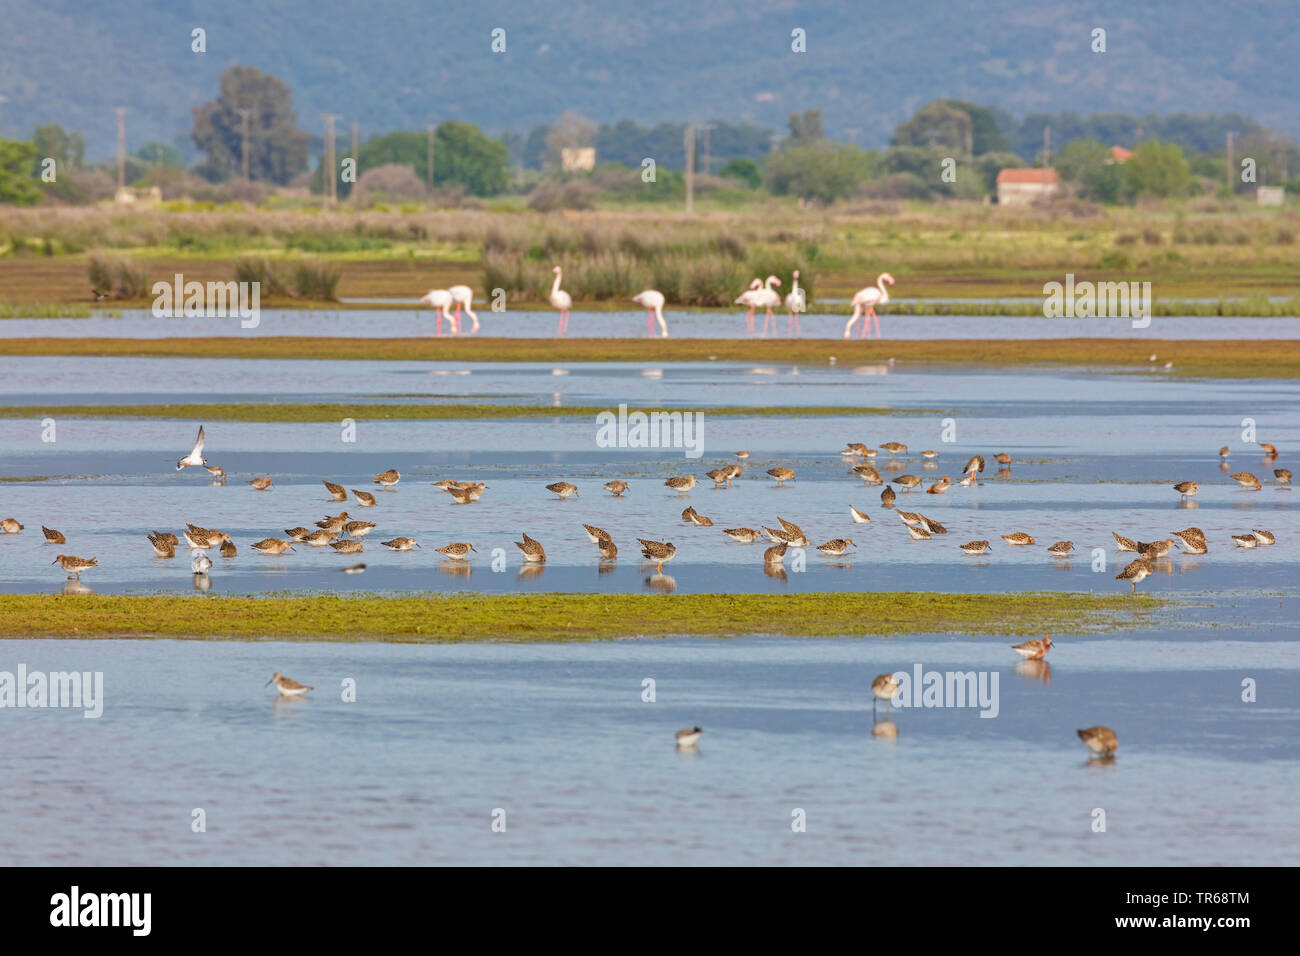 ruff (Philomachus pugnax), troop foraging in shallow water, flamingos in the background, Israel Stock Photo